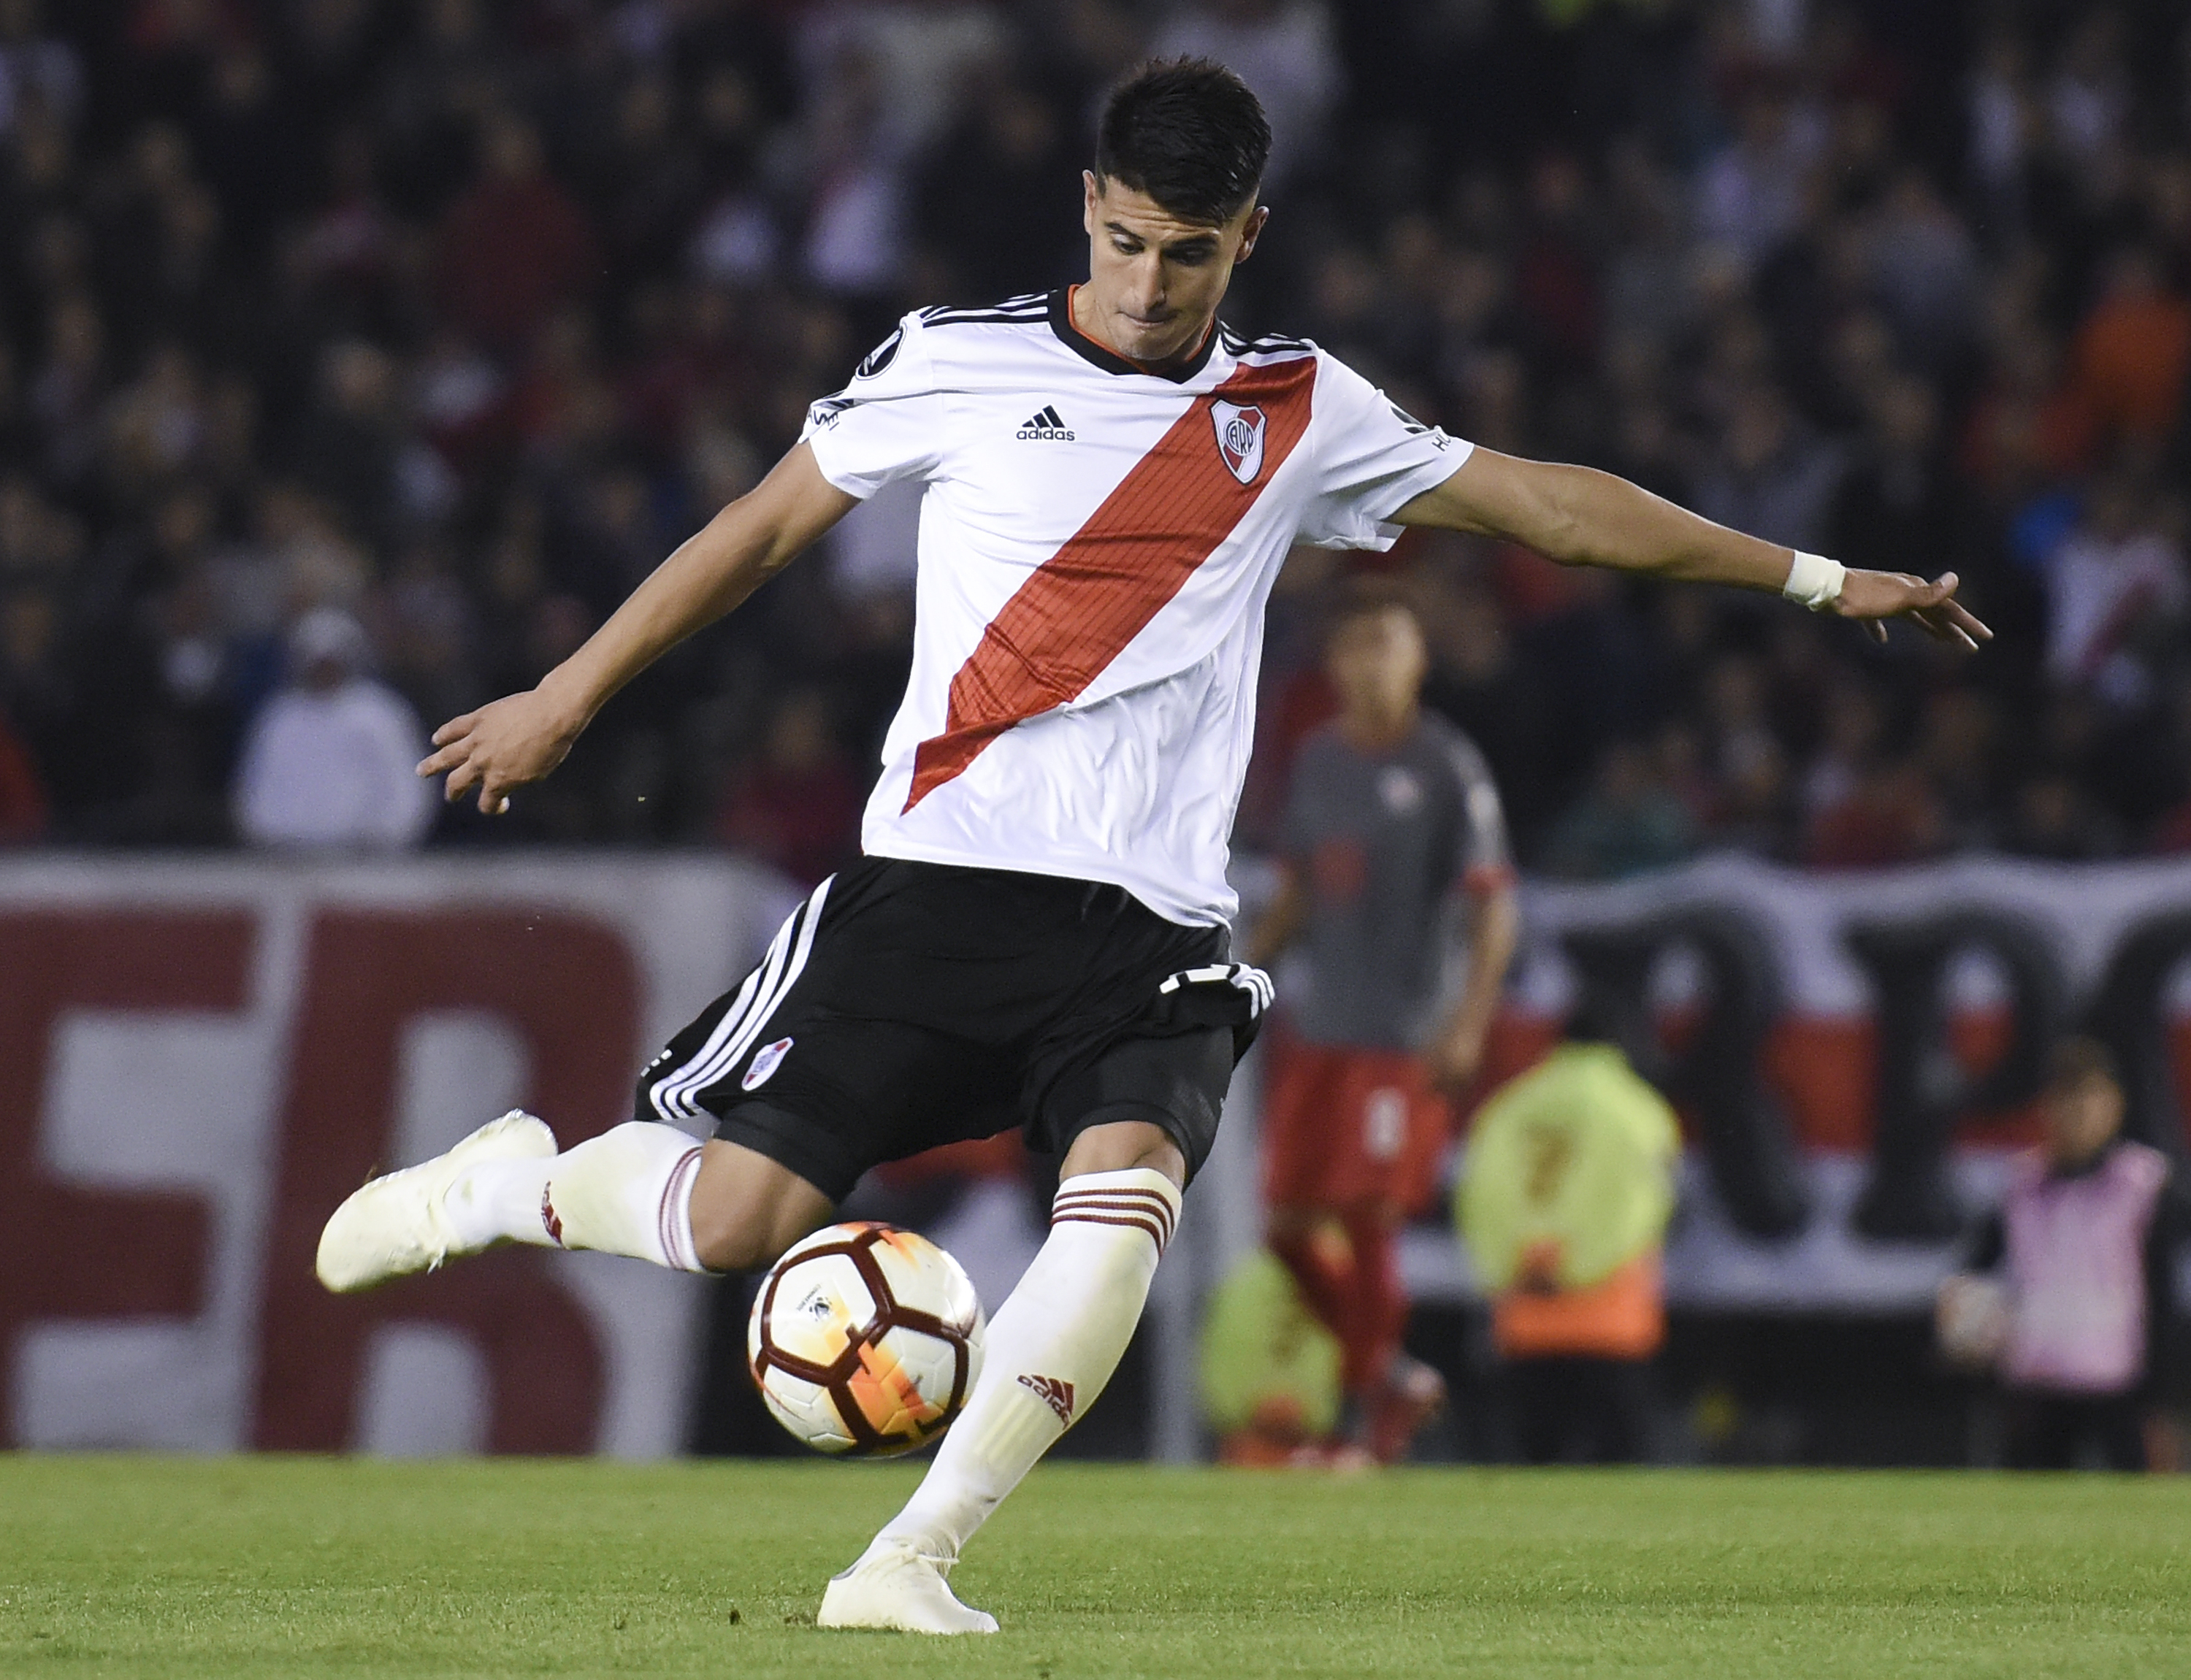 BUENOS AIRES, ARGENTINA - OCTOBER 02: Exequiel Palacios of River Plate drives the ball during a quarter final second leg match of Copa CONMEBOL Libertadores 2018 between River Plate and Independiente at Estadio Monumental Antonio Vespucio Liberti on October 2, 2018 in Buenos Aires, Argentina. (Photo by Marcelo Endelli/Getty Images)